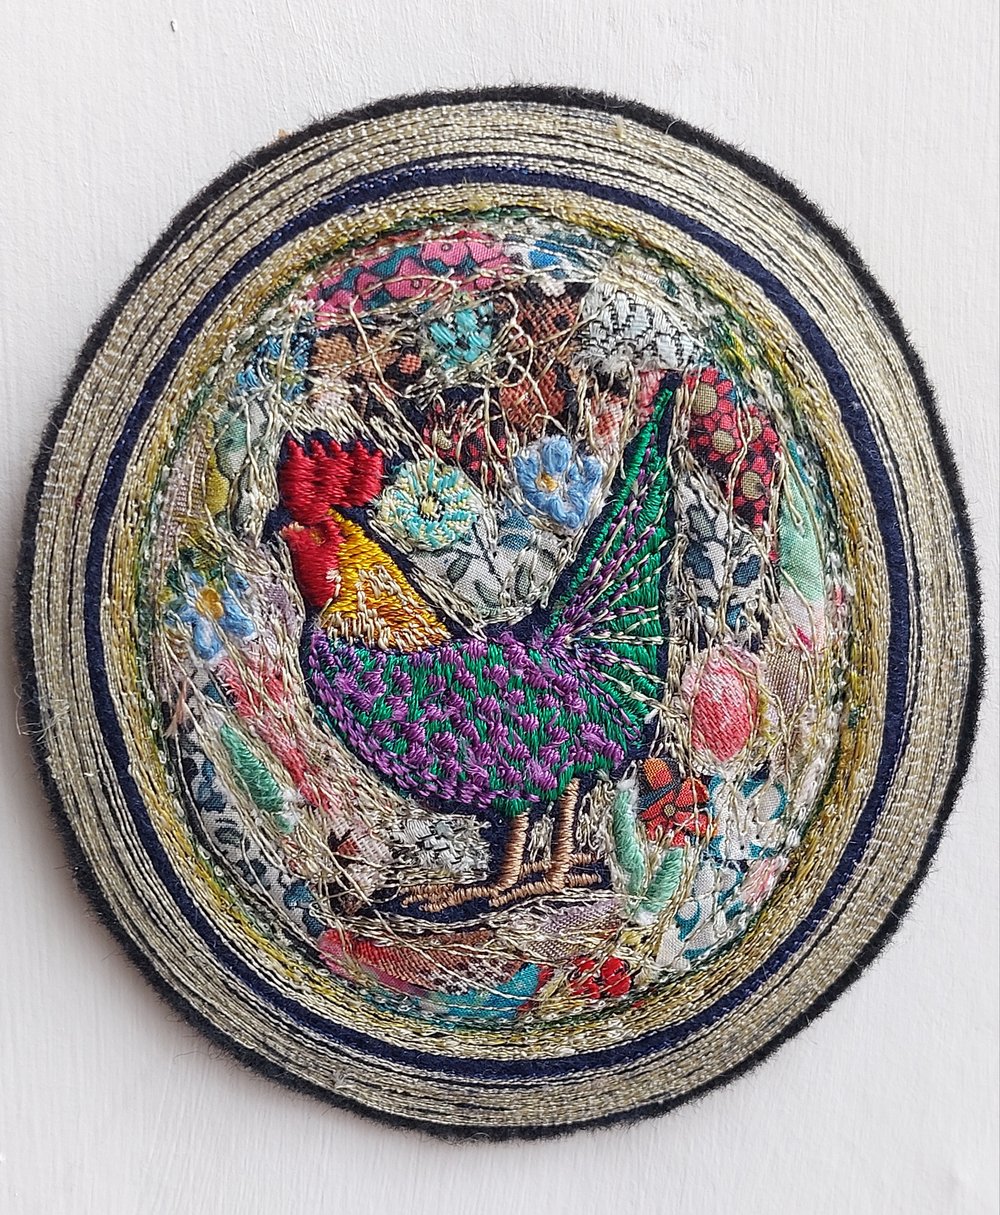 Image of Cockerell miniature embroidery hanging 